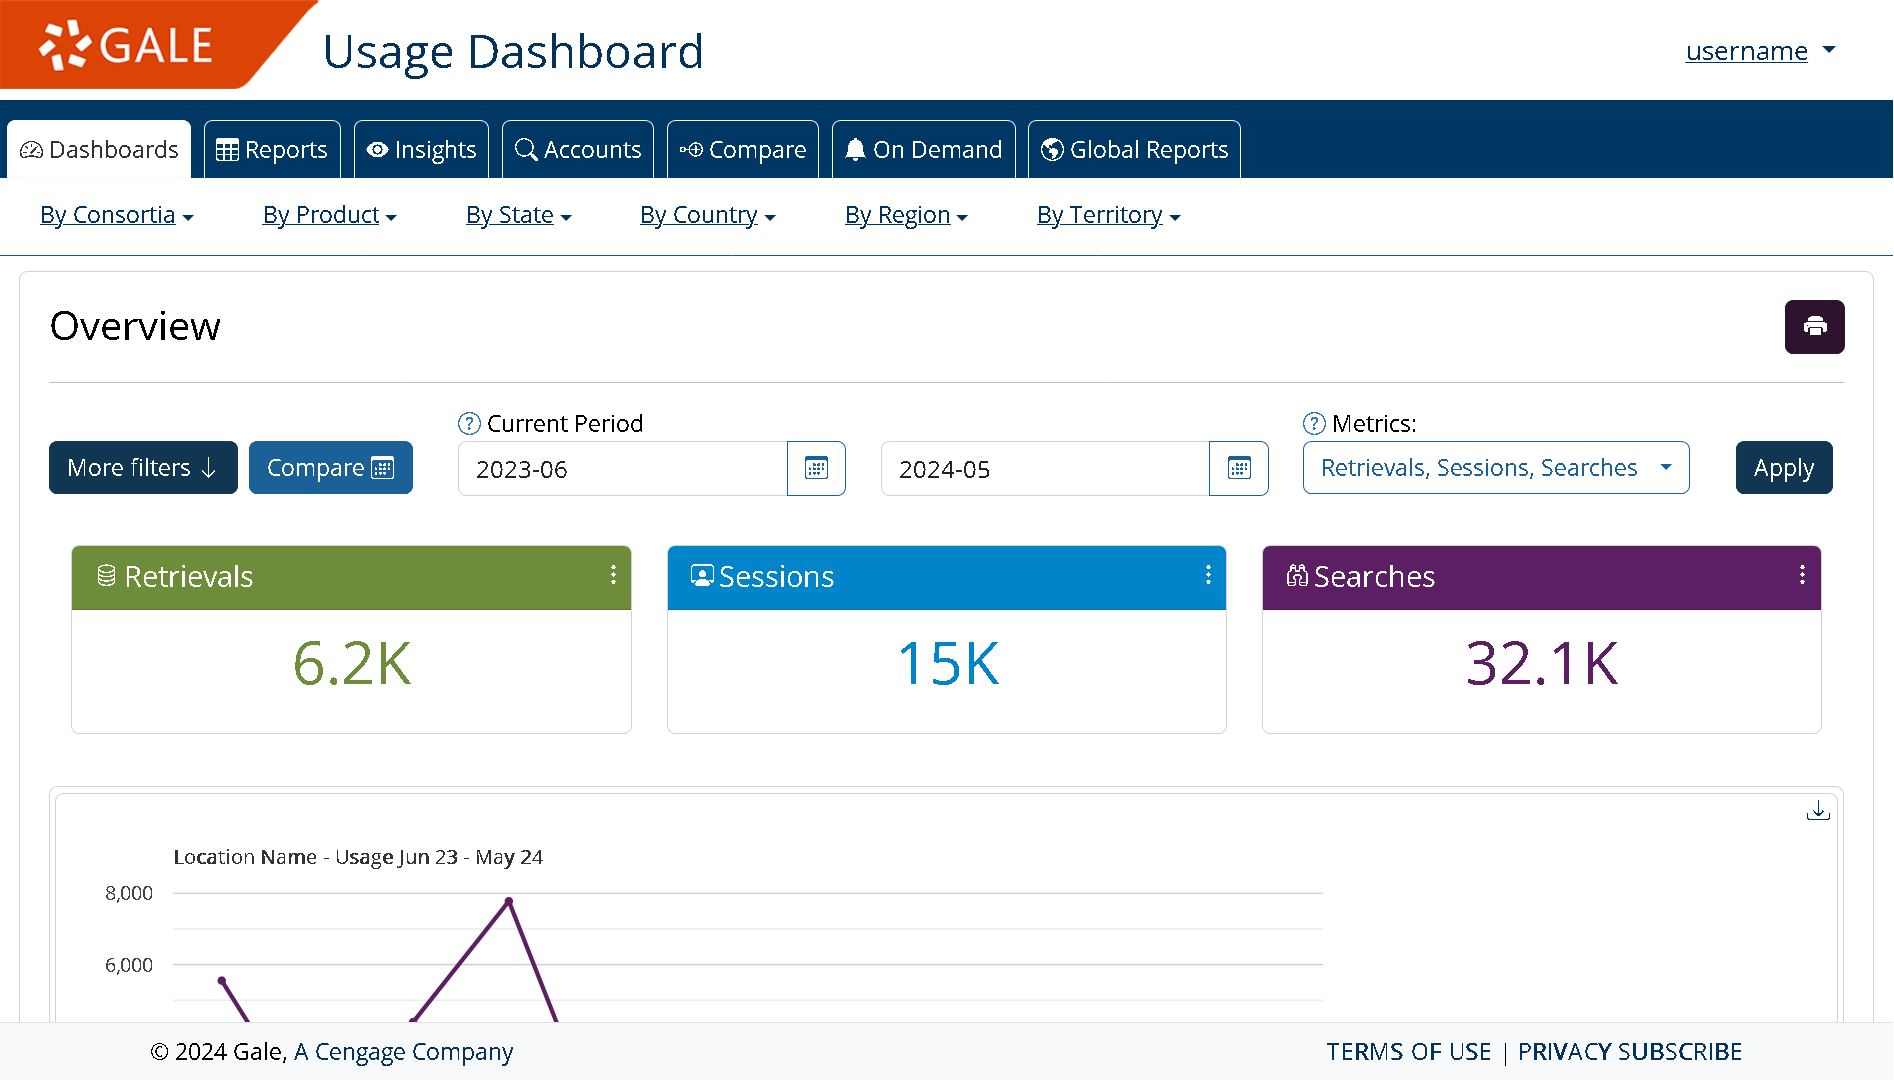 Usage Dashboard Overview